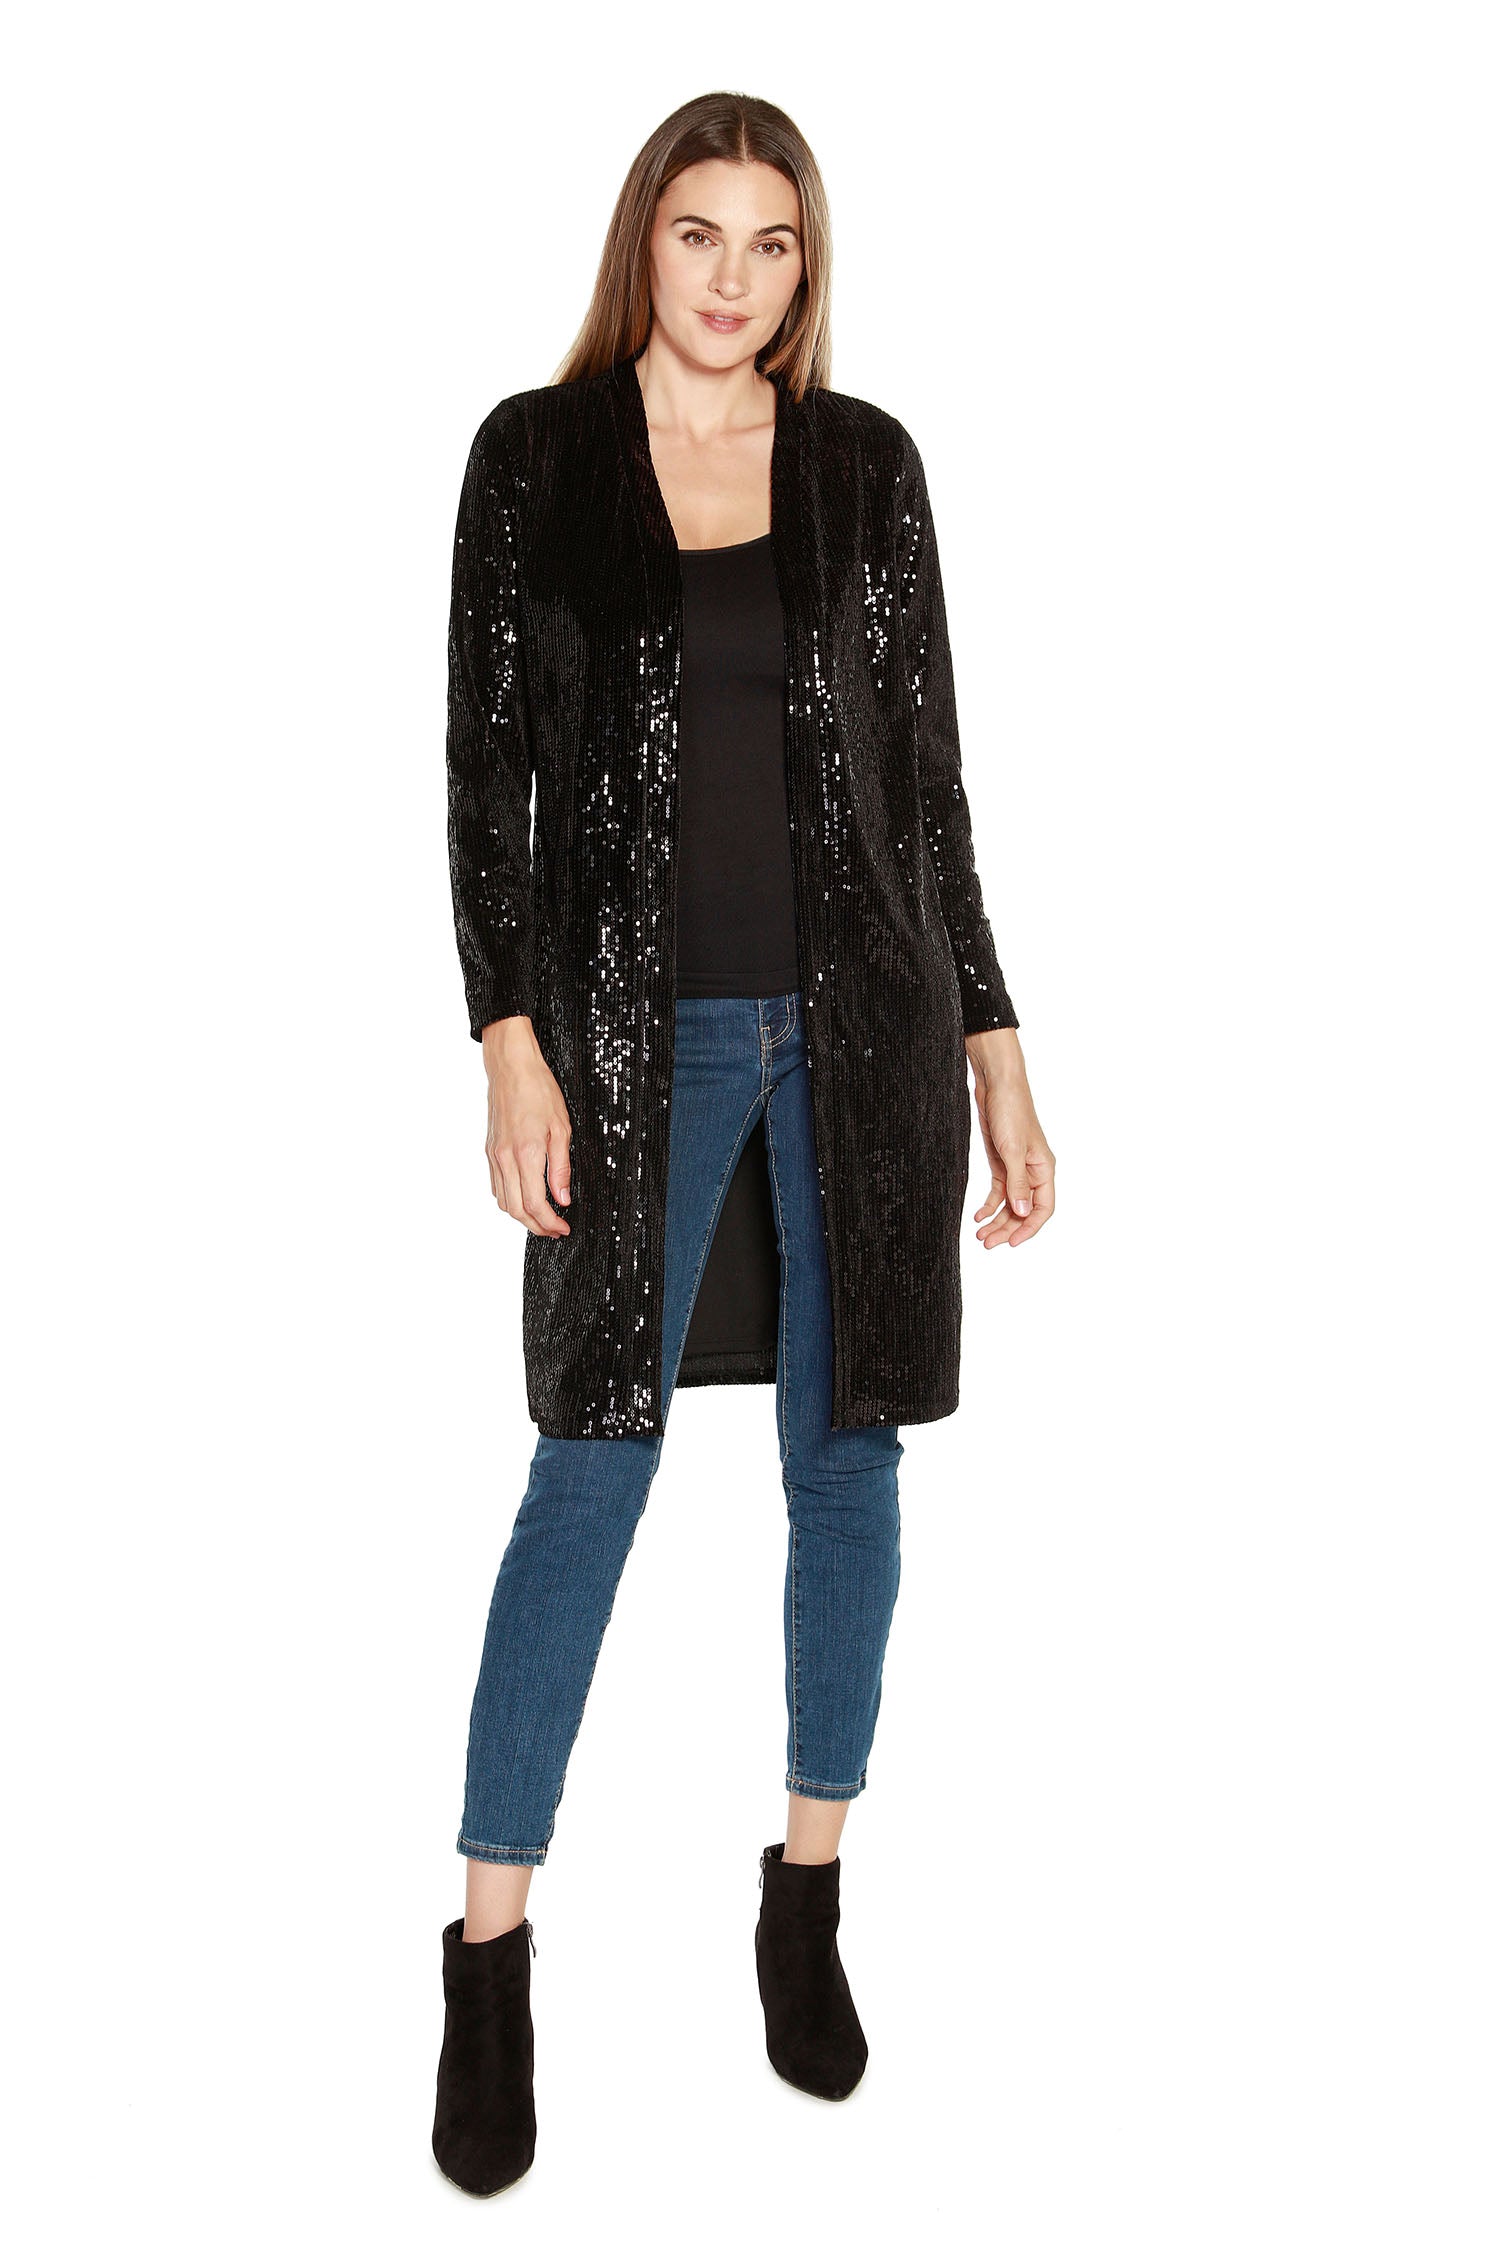 Women's Holiday Sequin Cardigan Open Front with Side Slits